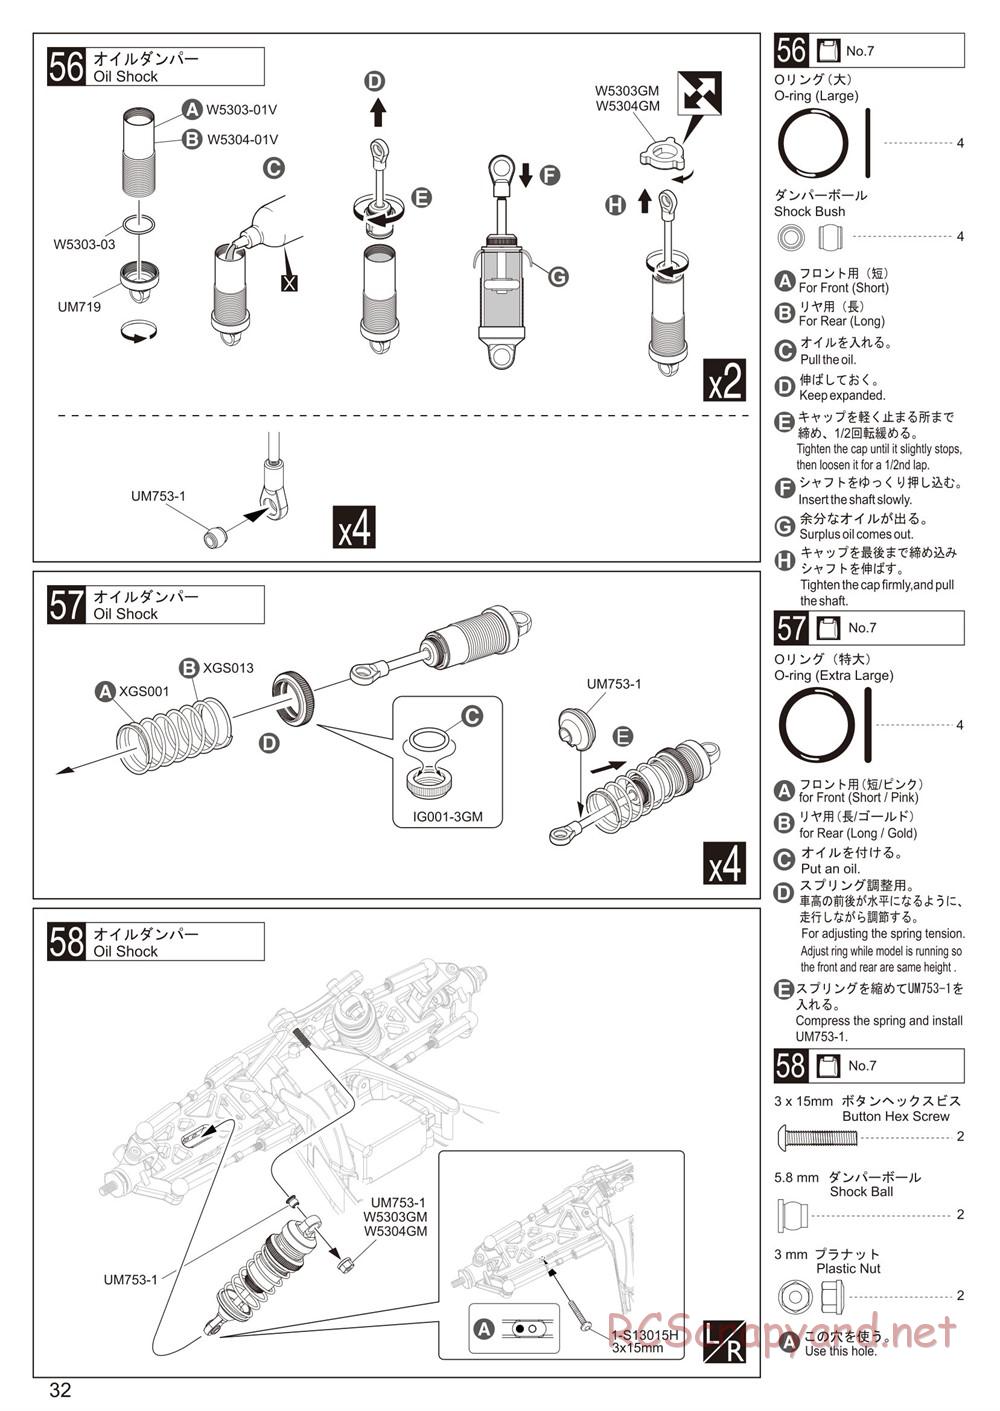 Kyosho - Ultima RB6.6 - Manual - Page 32